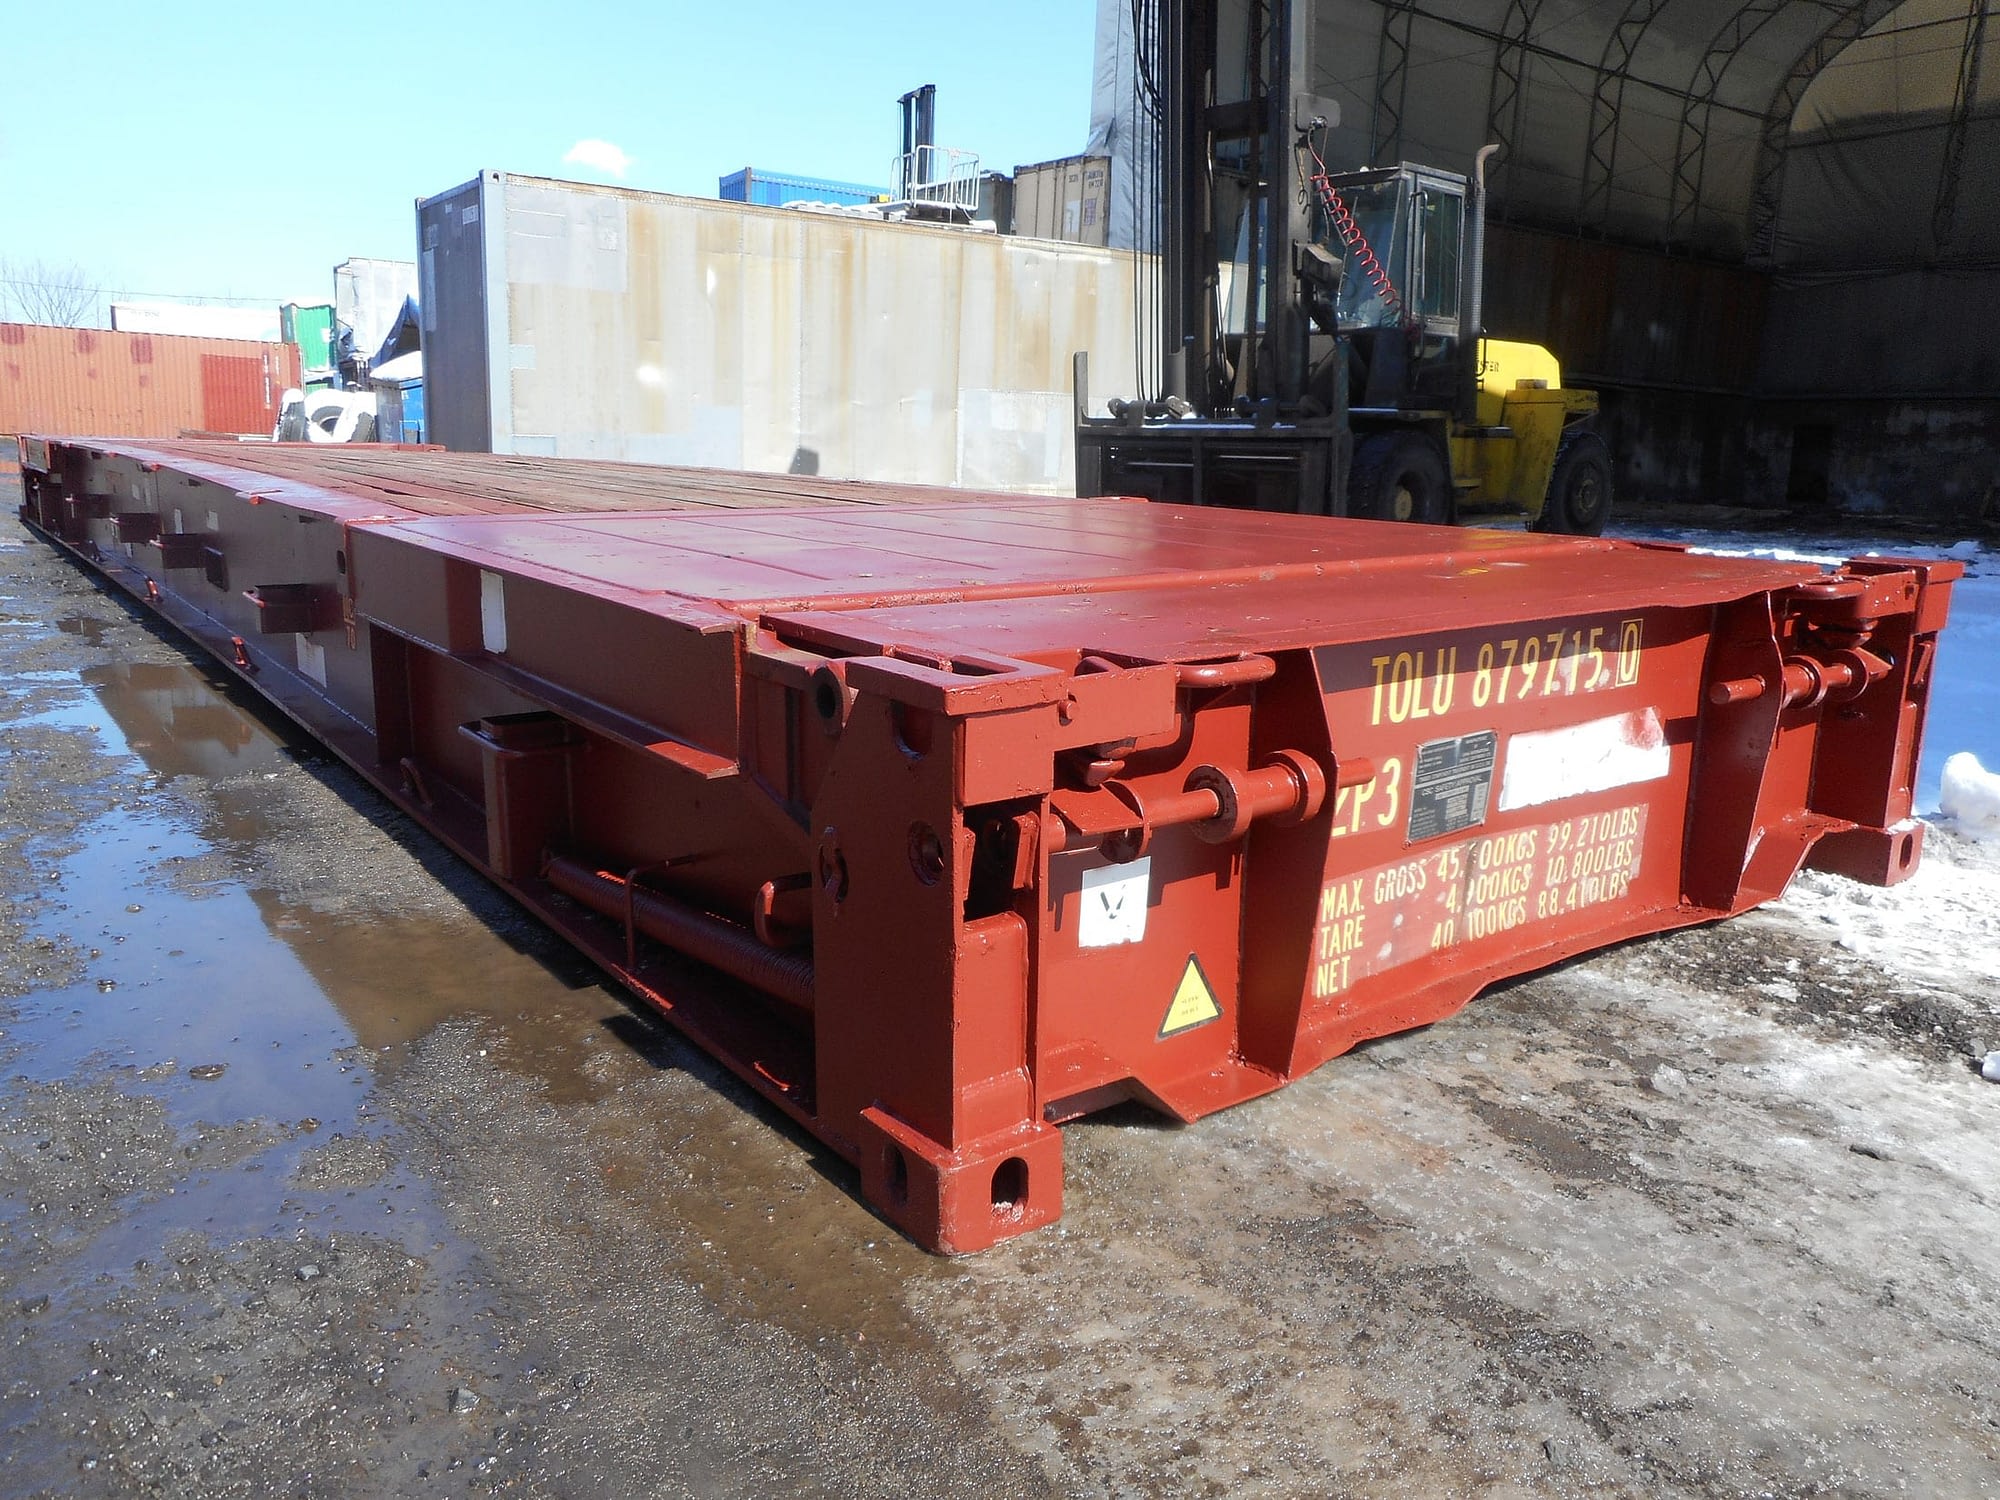 TRS flatracks can be used for export or the repositioning of oversized or heavy materials.